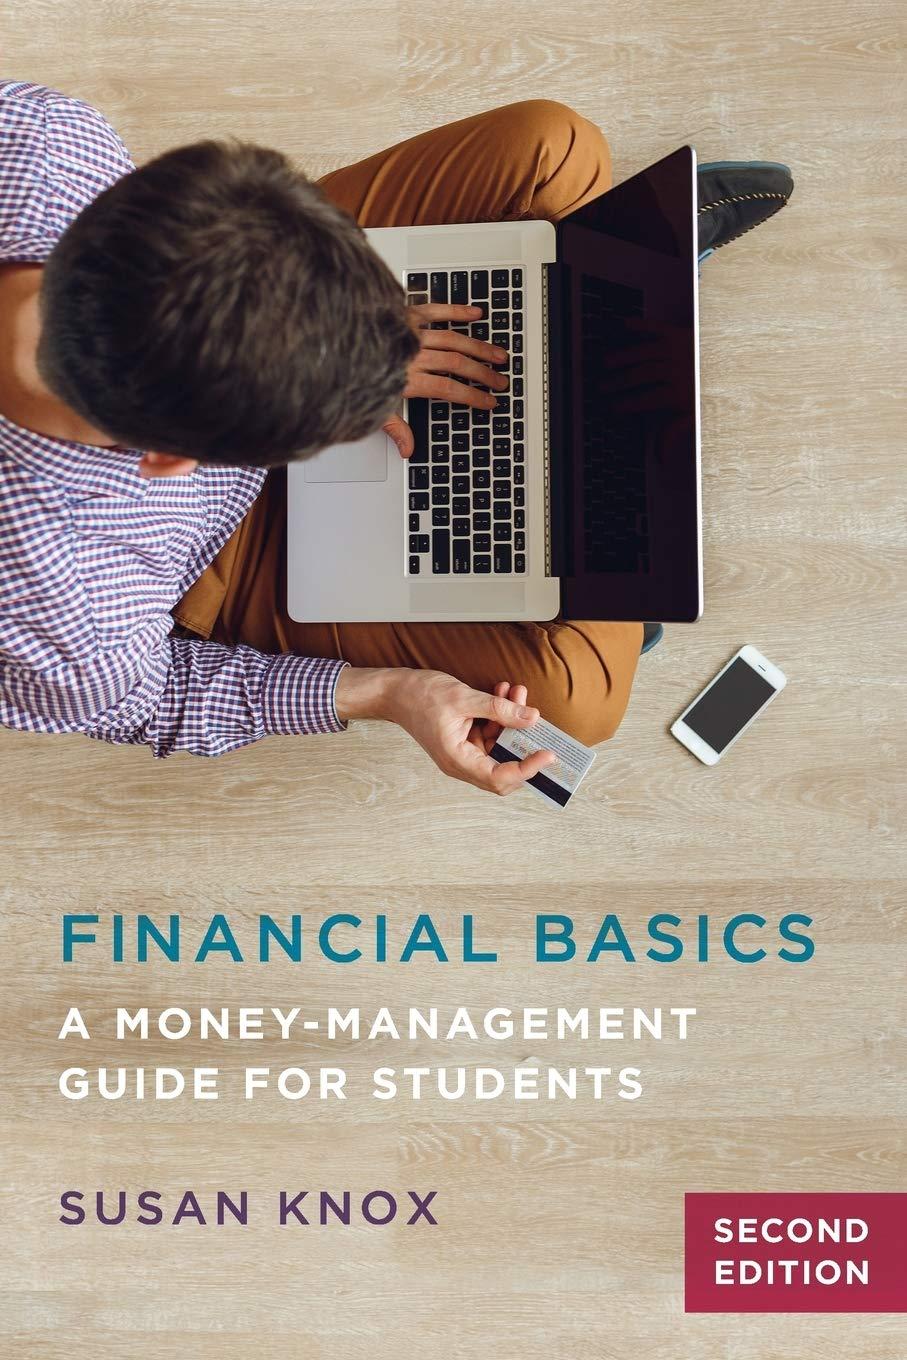 financial basics a money management guide for students 2nd edition susan knox 0814253067, 978-0814253069